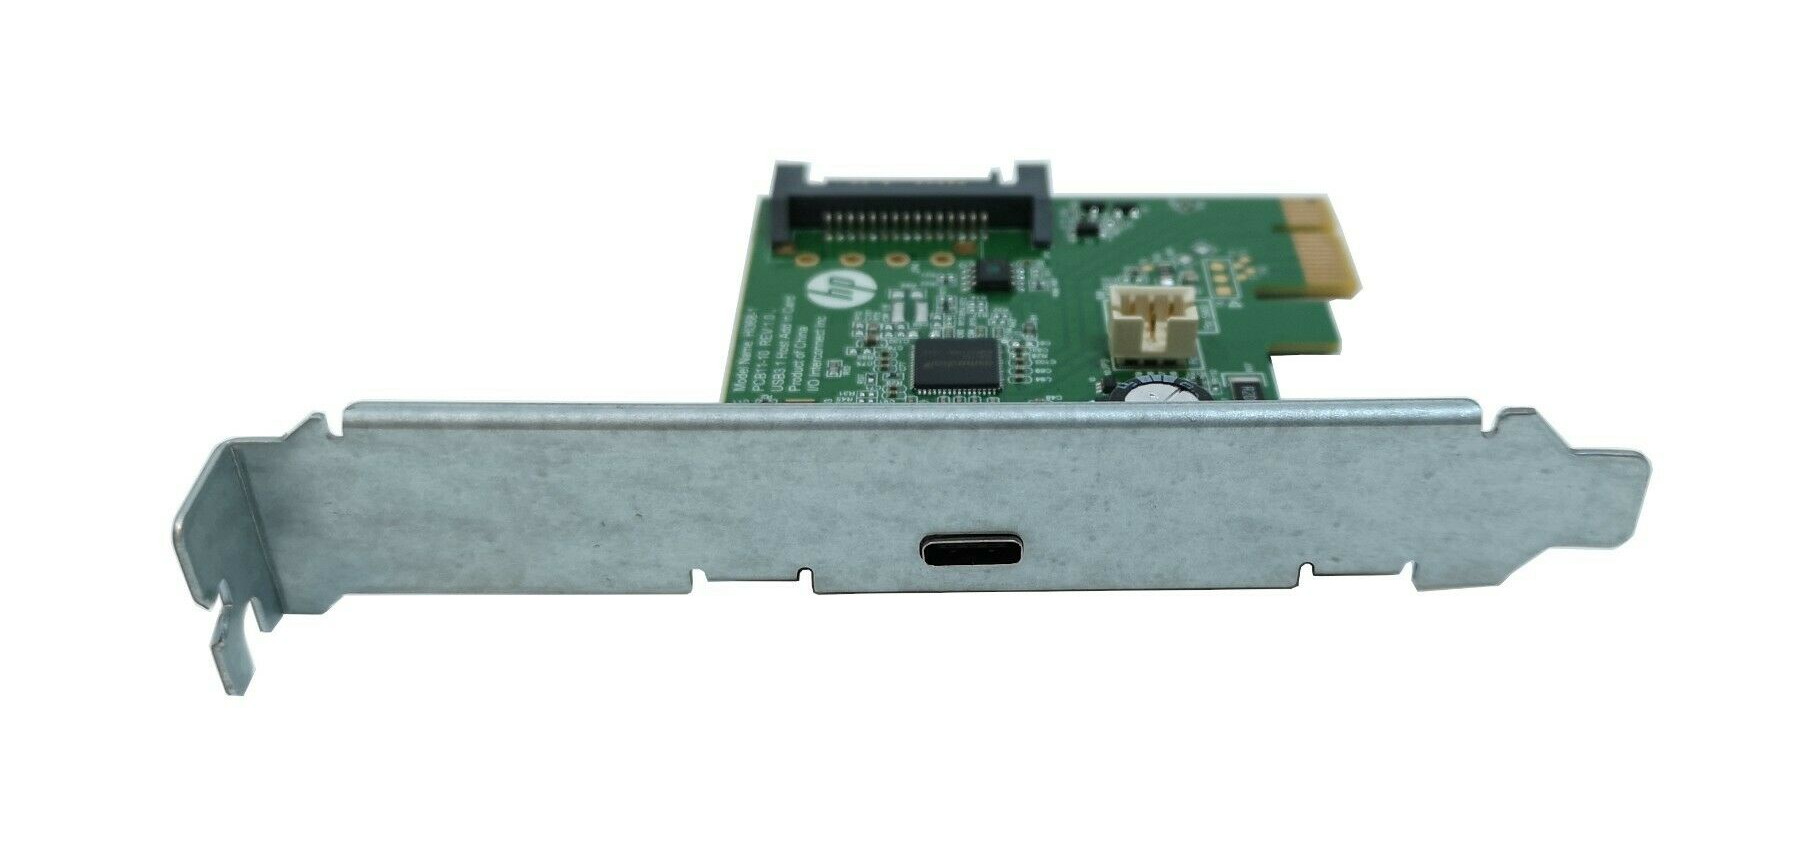 USB-C 3.1 PCI-E Data Link Card Adapter For Oculus VR Headsets 10Gbps USB Type C Port - image 2 of 4